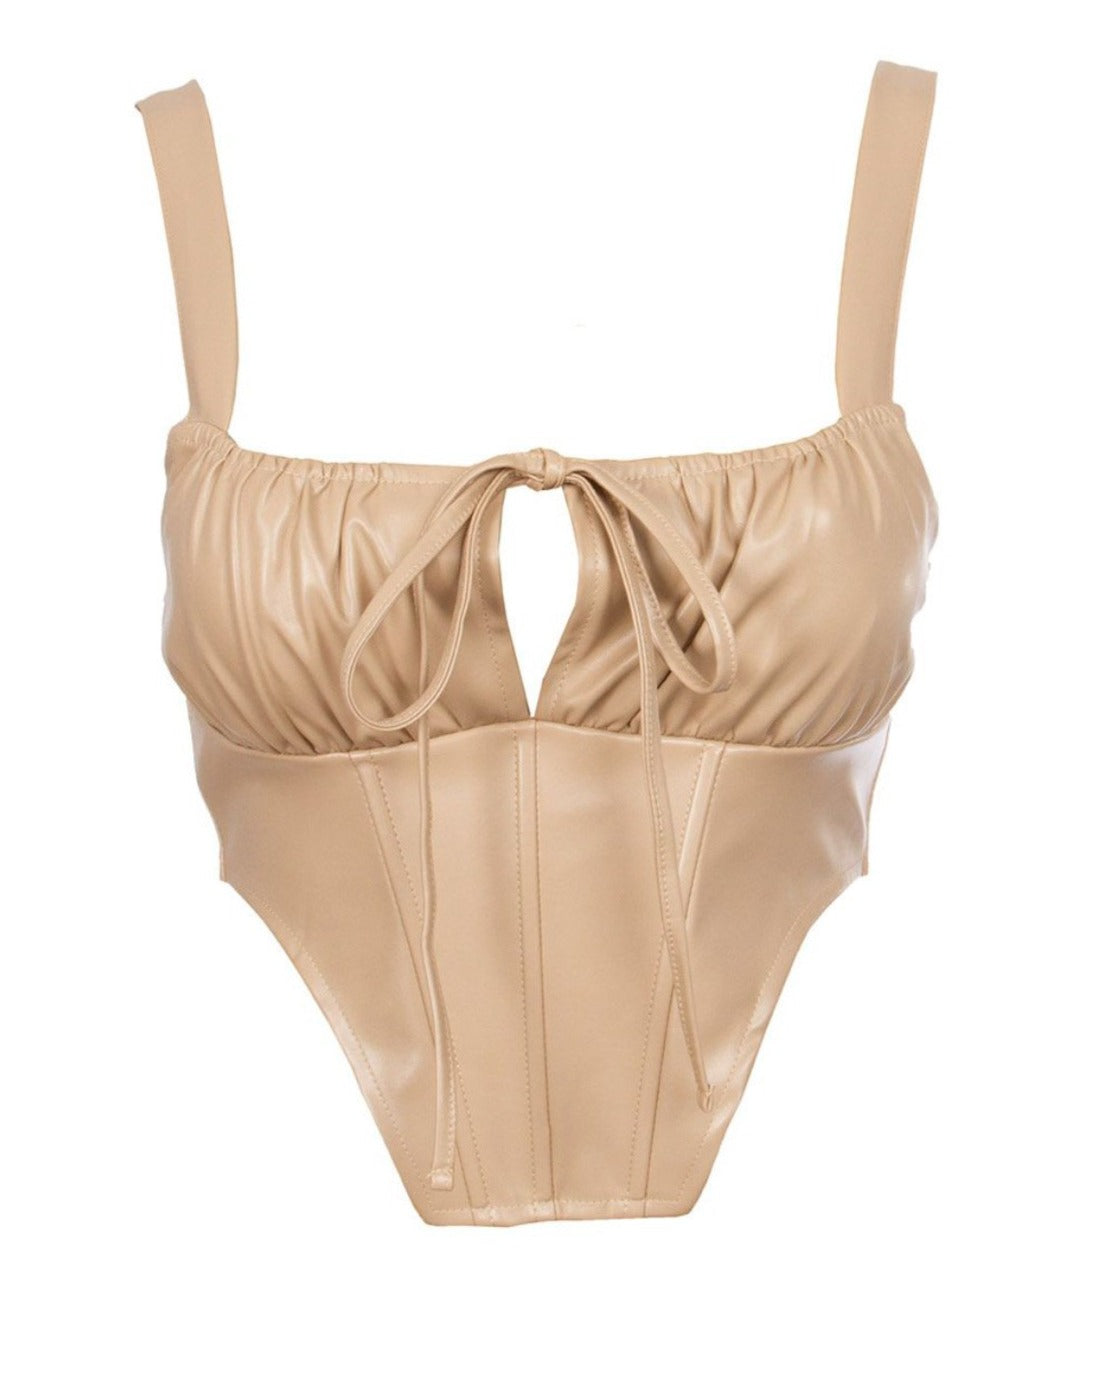 the stylish Liv Taupe Leather Corset Crop Top, showcasing its chic design and unique tie detail.